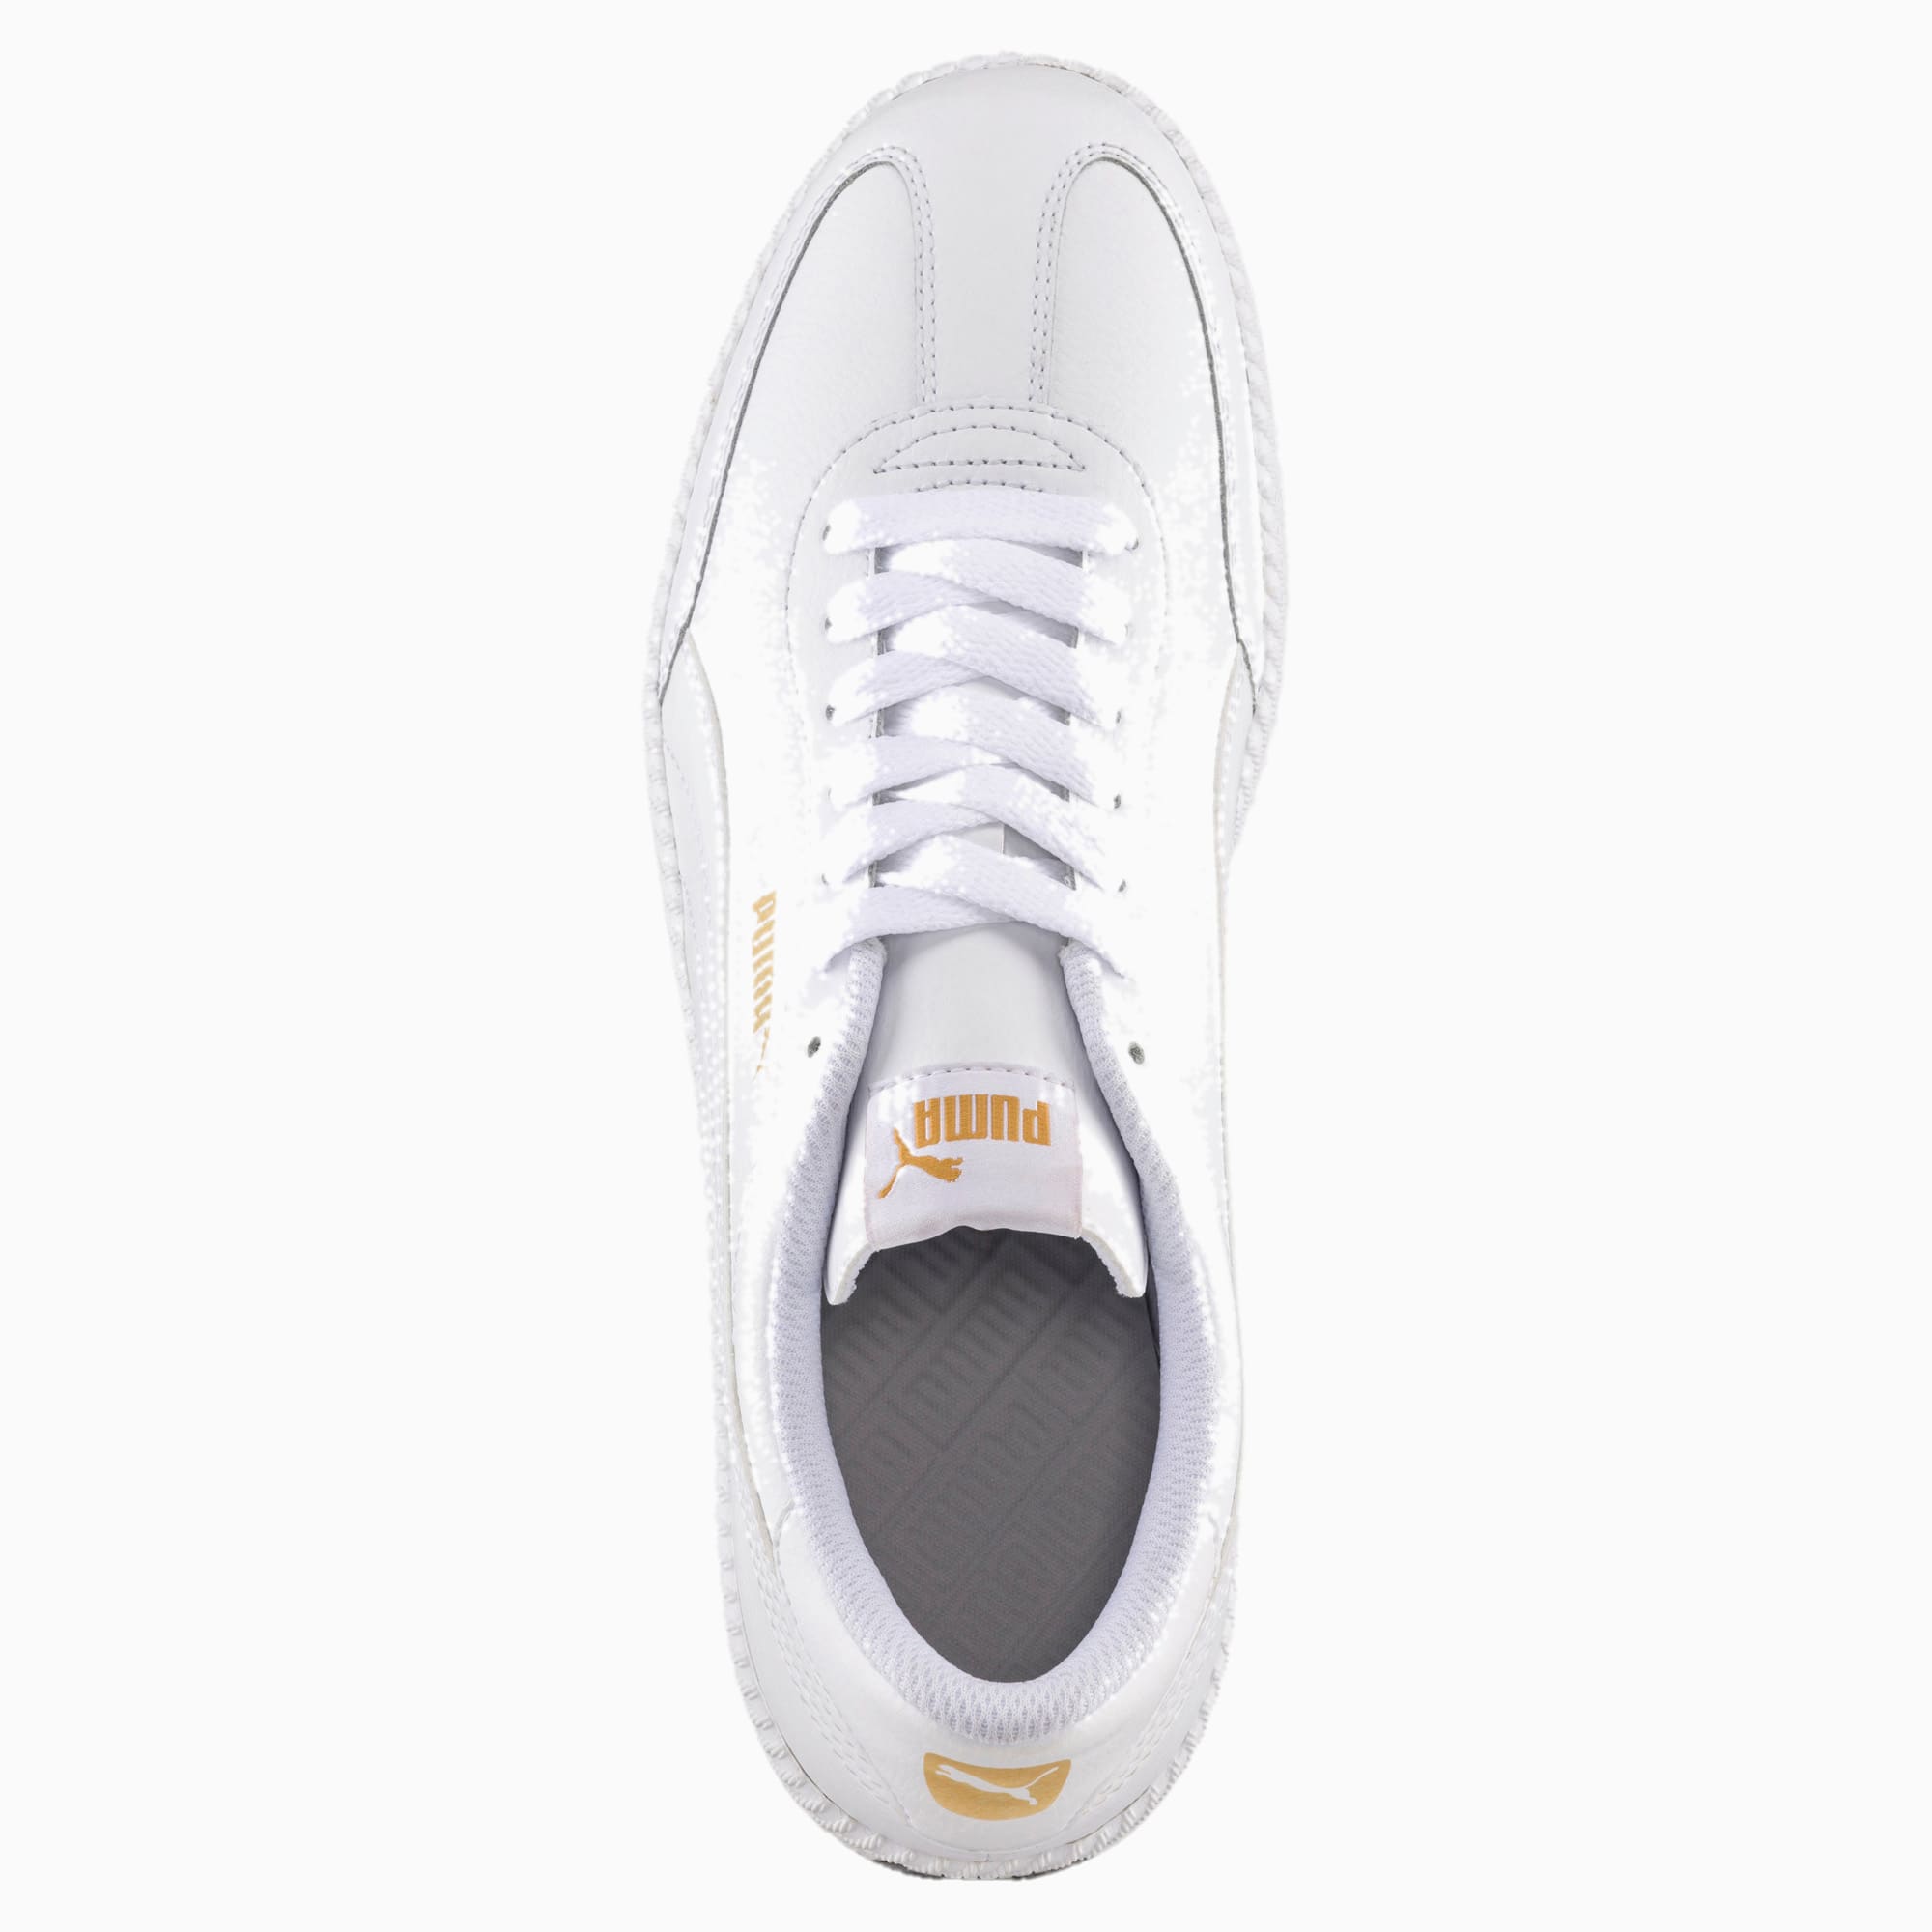 astro cup leather trainers